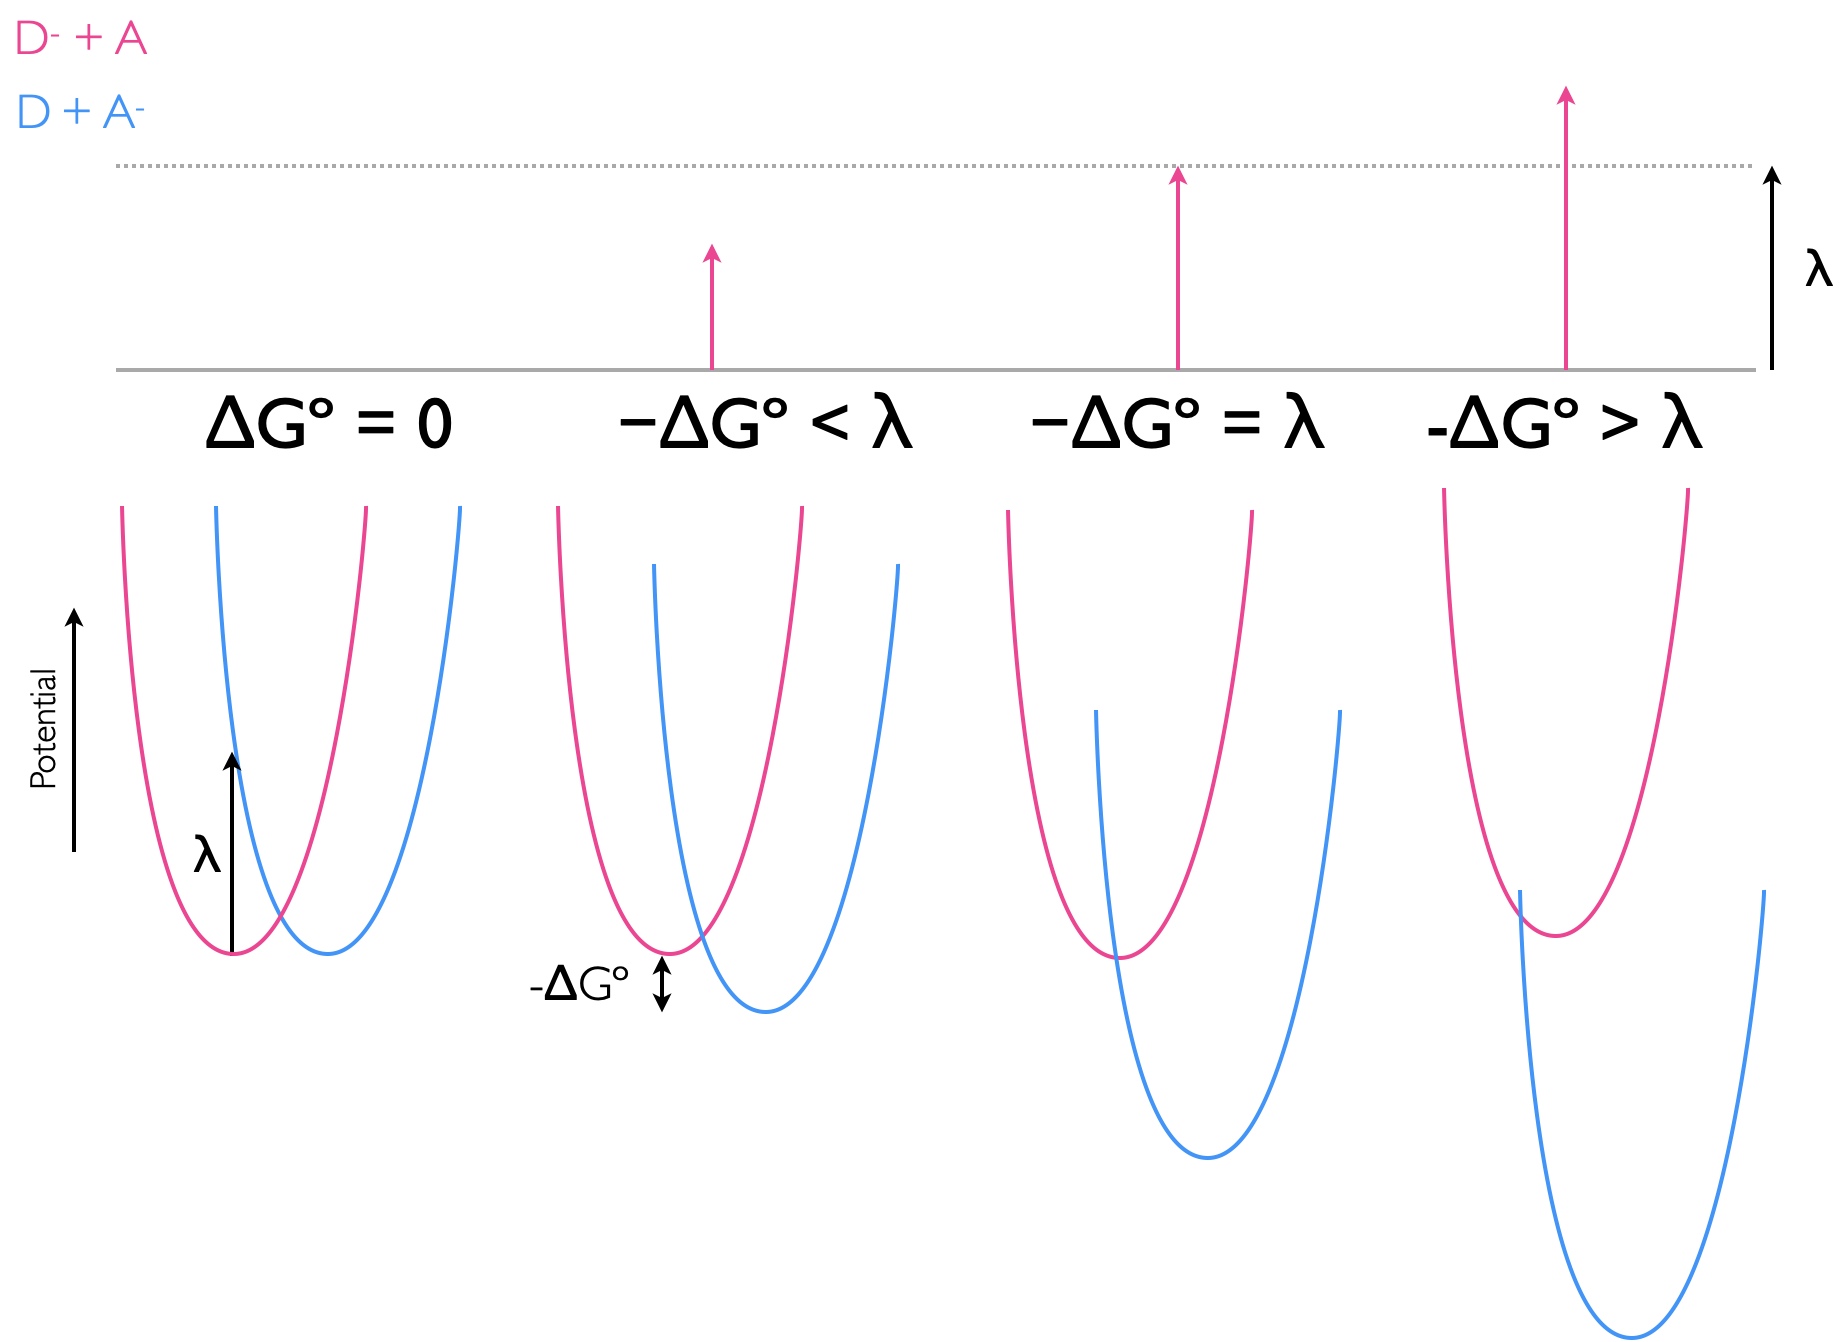 The electron transfer between donor and acceptor with differing driving forces ΔGº, the potential energy wells of reactants (pink) and products (blue), with the reorganisation being the vertical transition from the bottom of the reactant well, and the activation energy, ΔG‡, being that from the bottom of the reactant potential well to the point where the two potential wells cross.